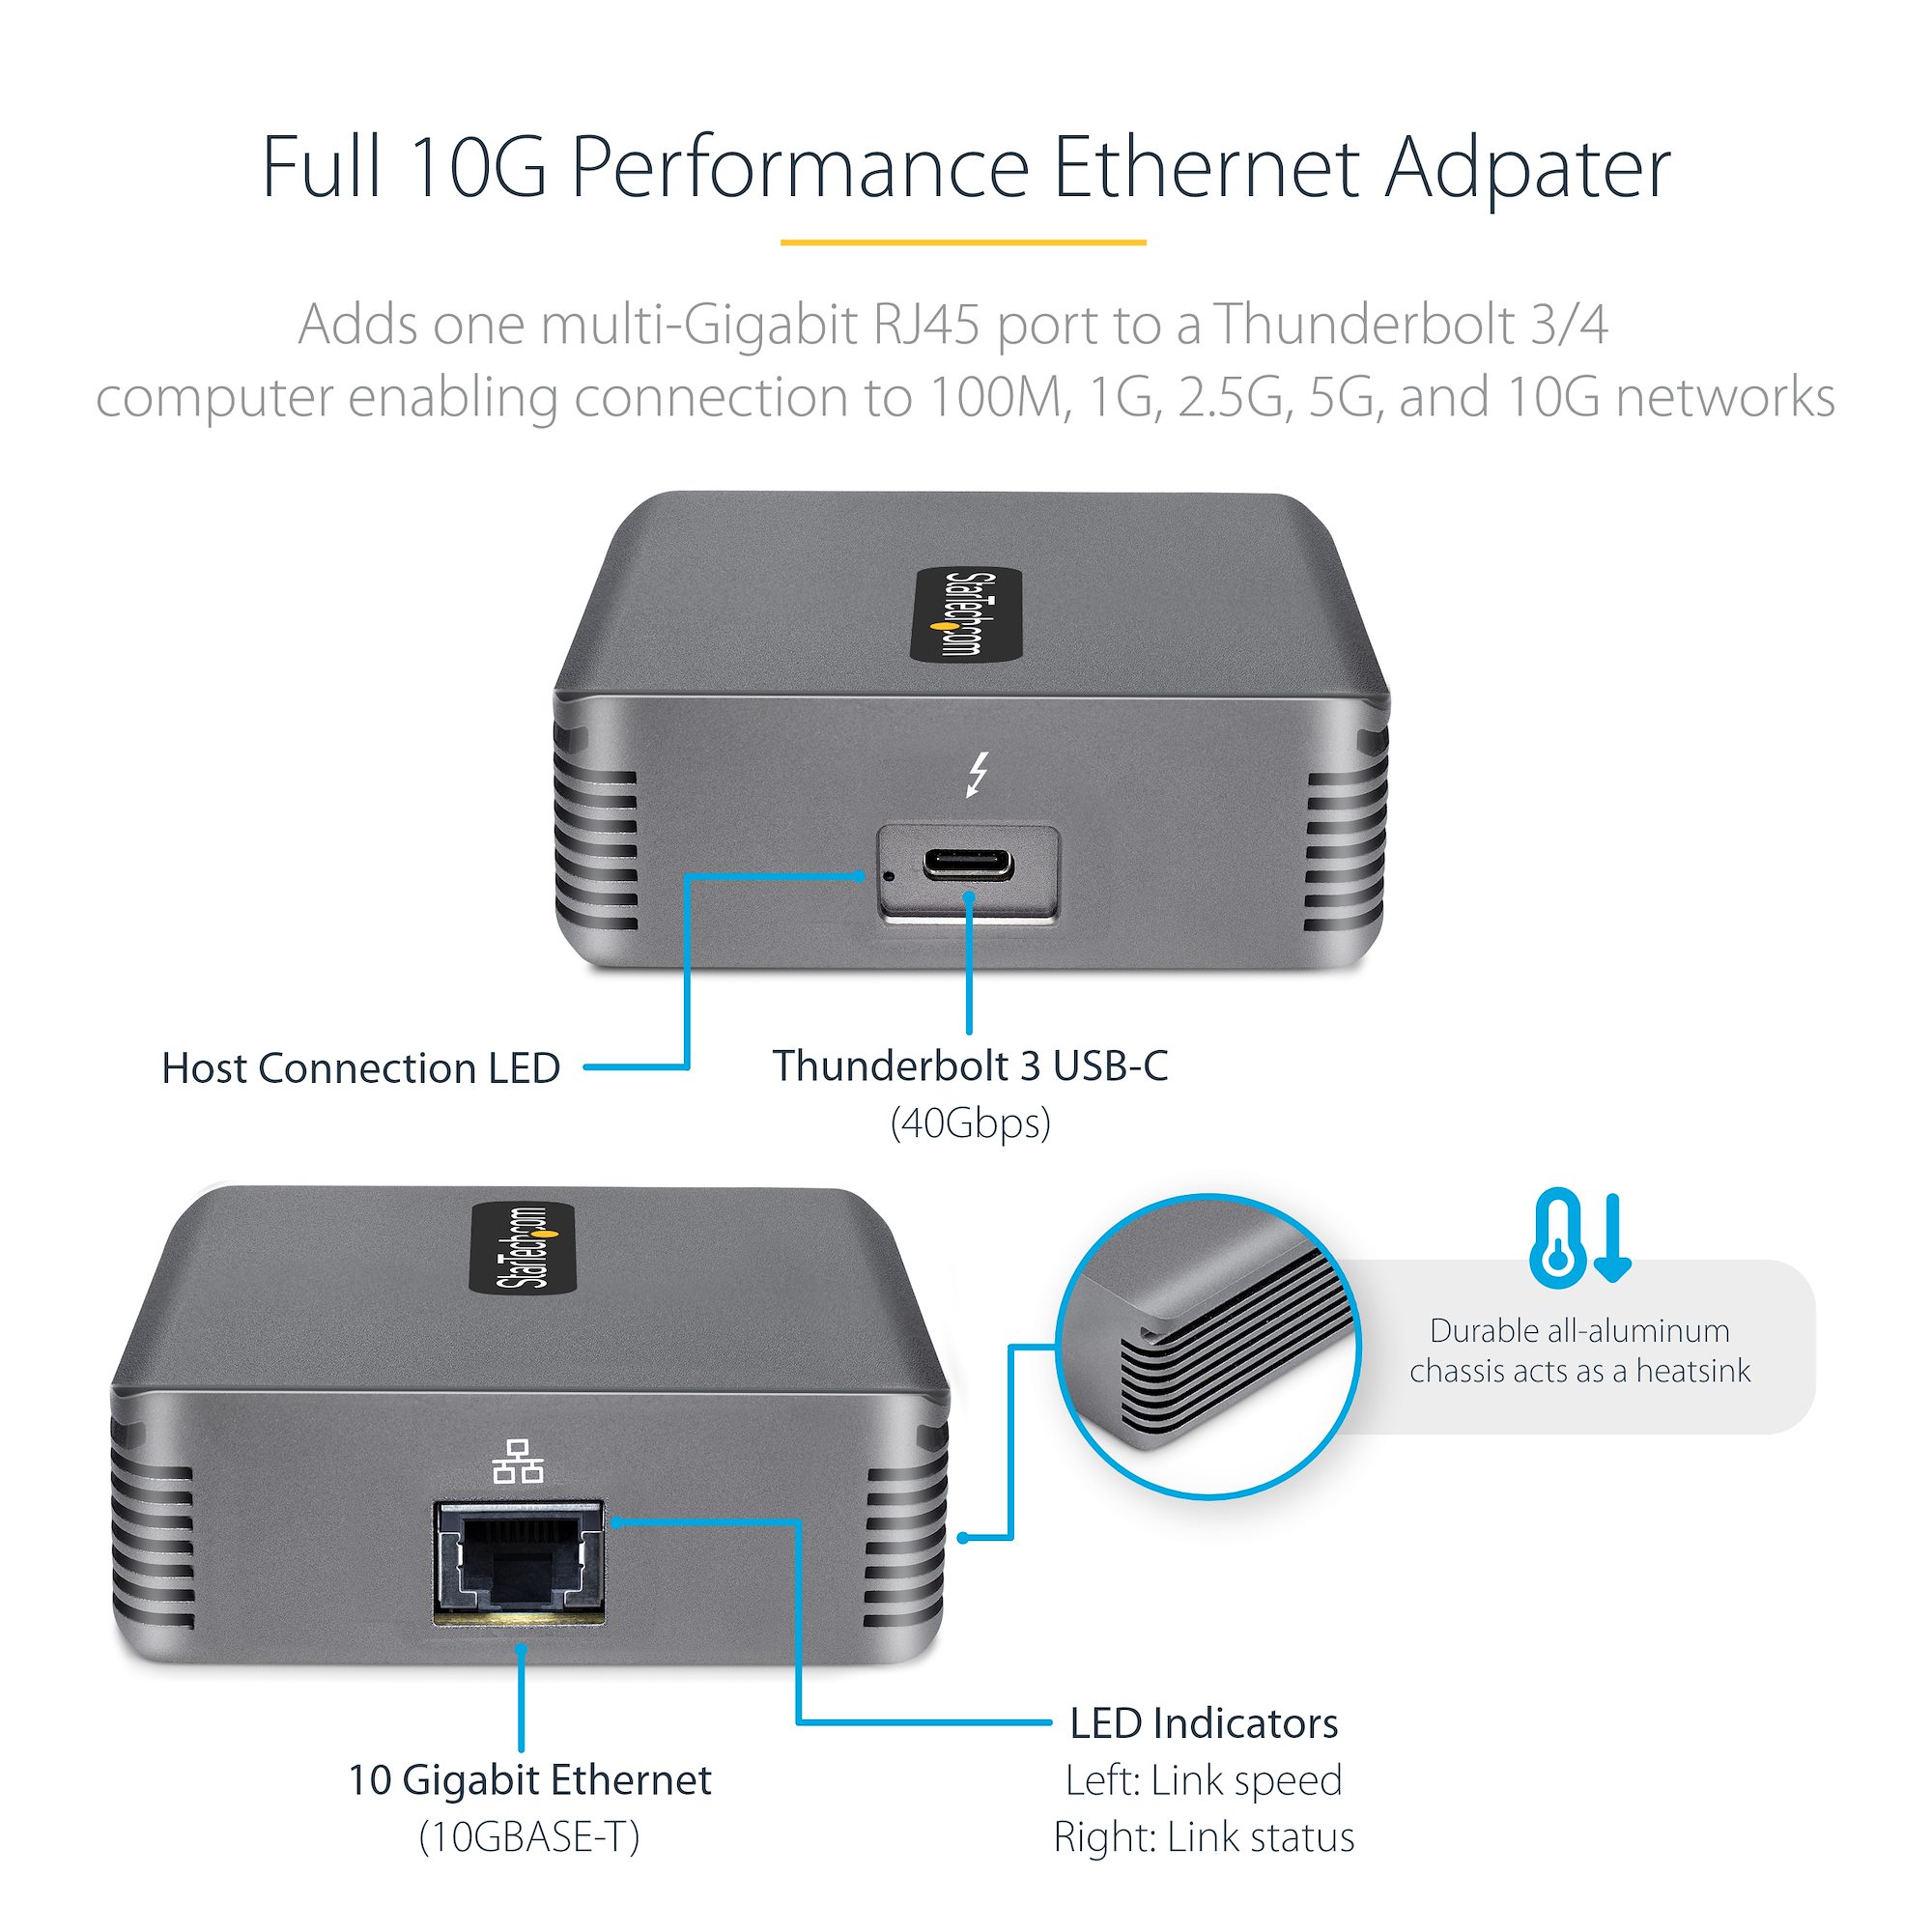 Thunderbolt3 to 10GbE LAN adapter